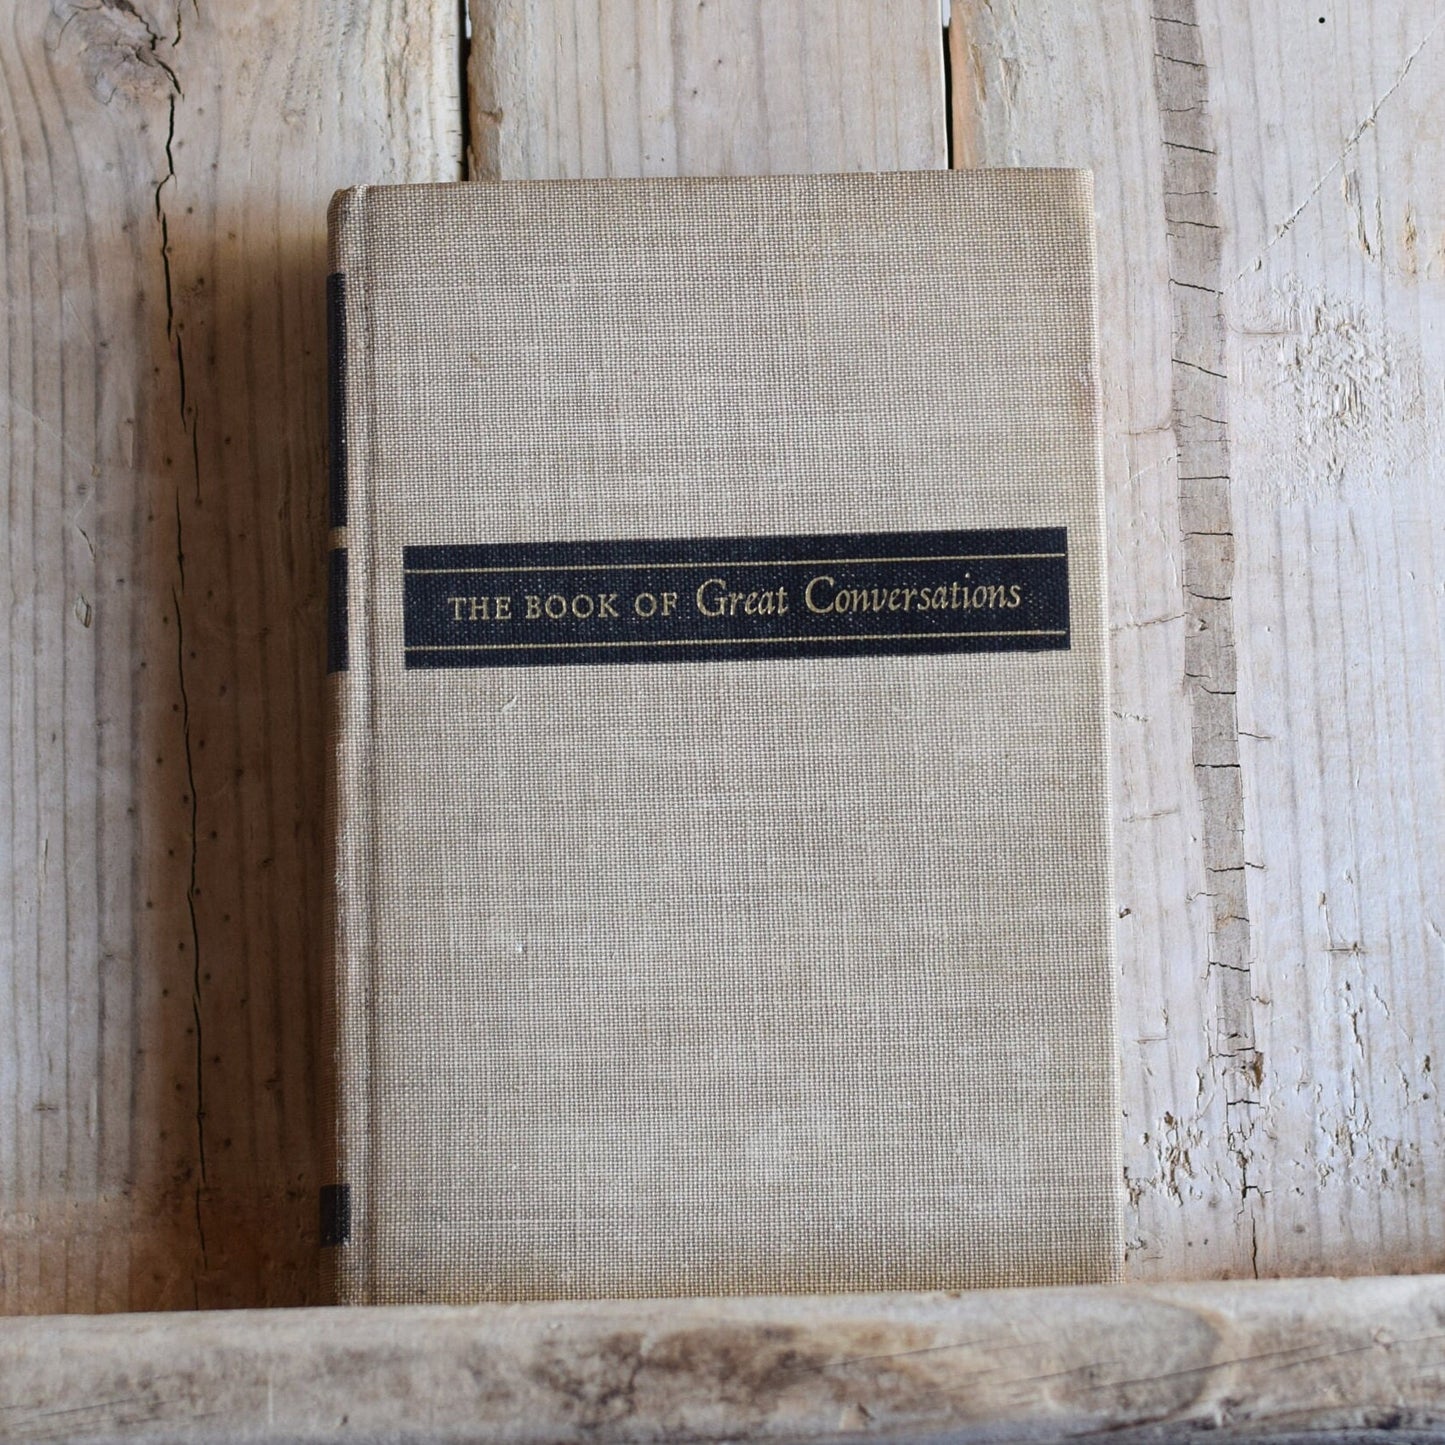 Vintage Fiction Hardback: The Great Book of Conversations - Edited by Louis Biancolli FIRST EDITION 1948